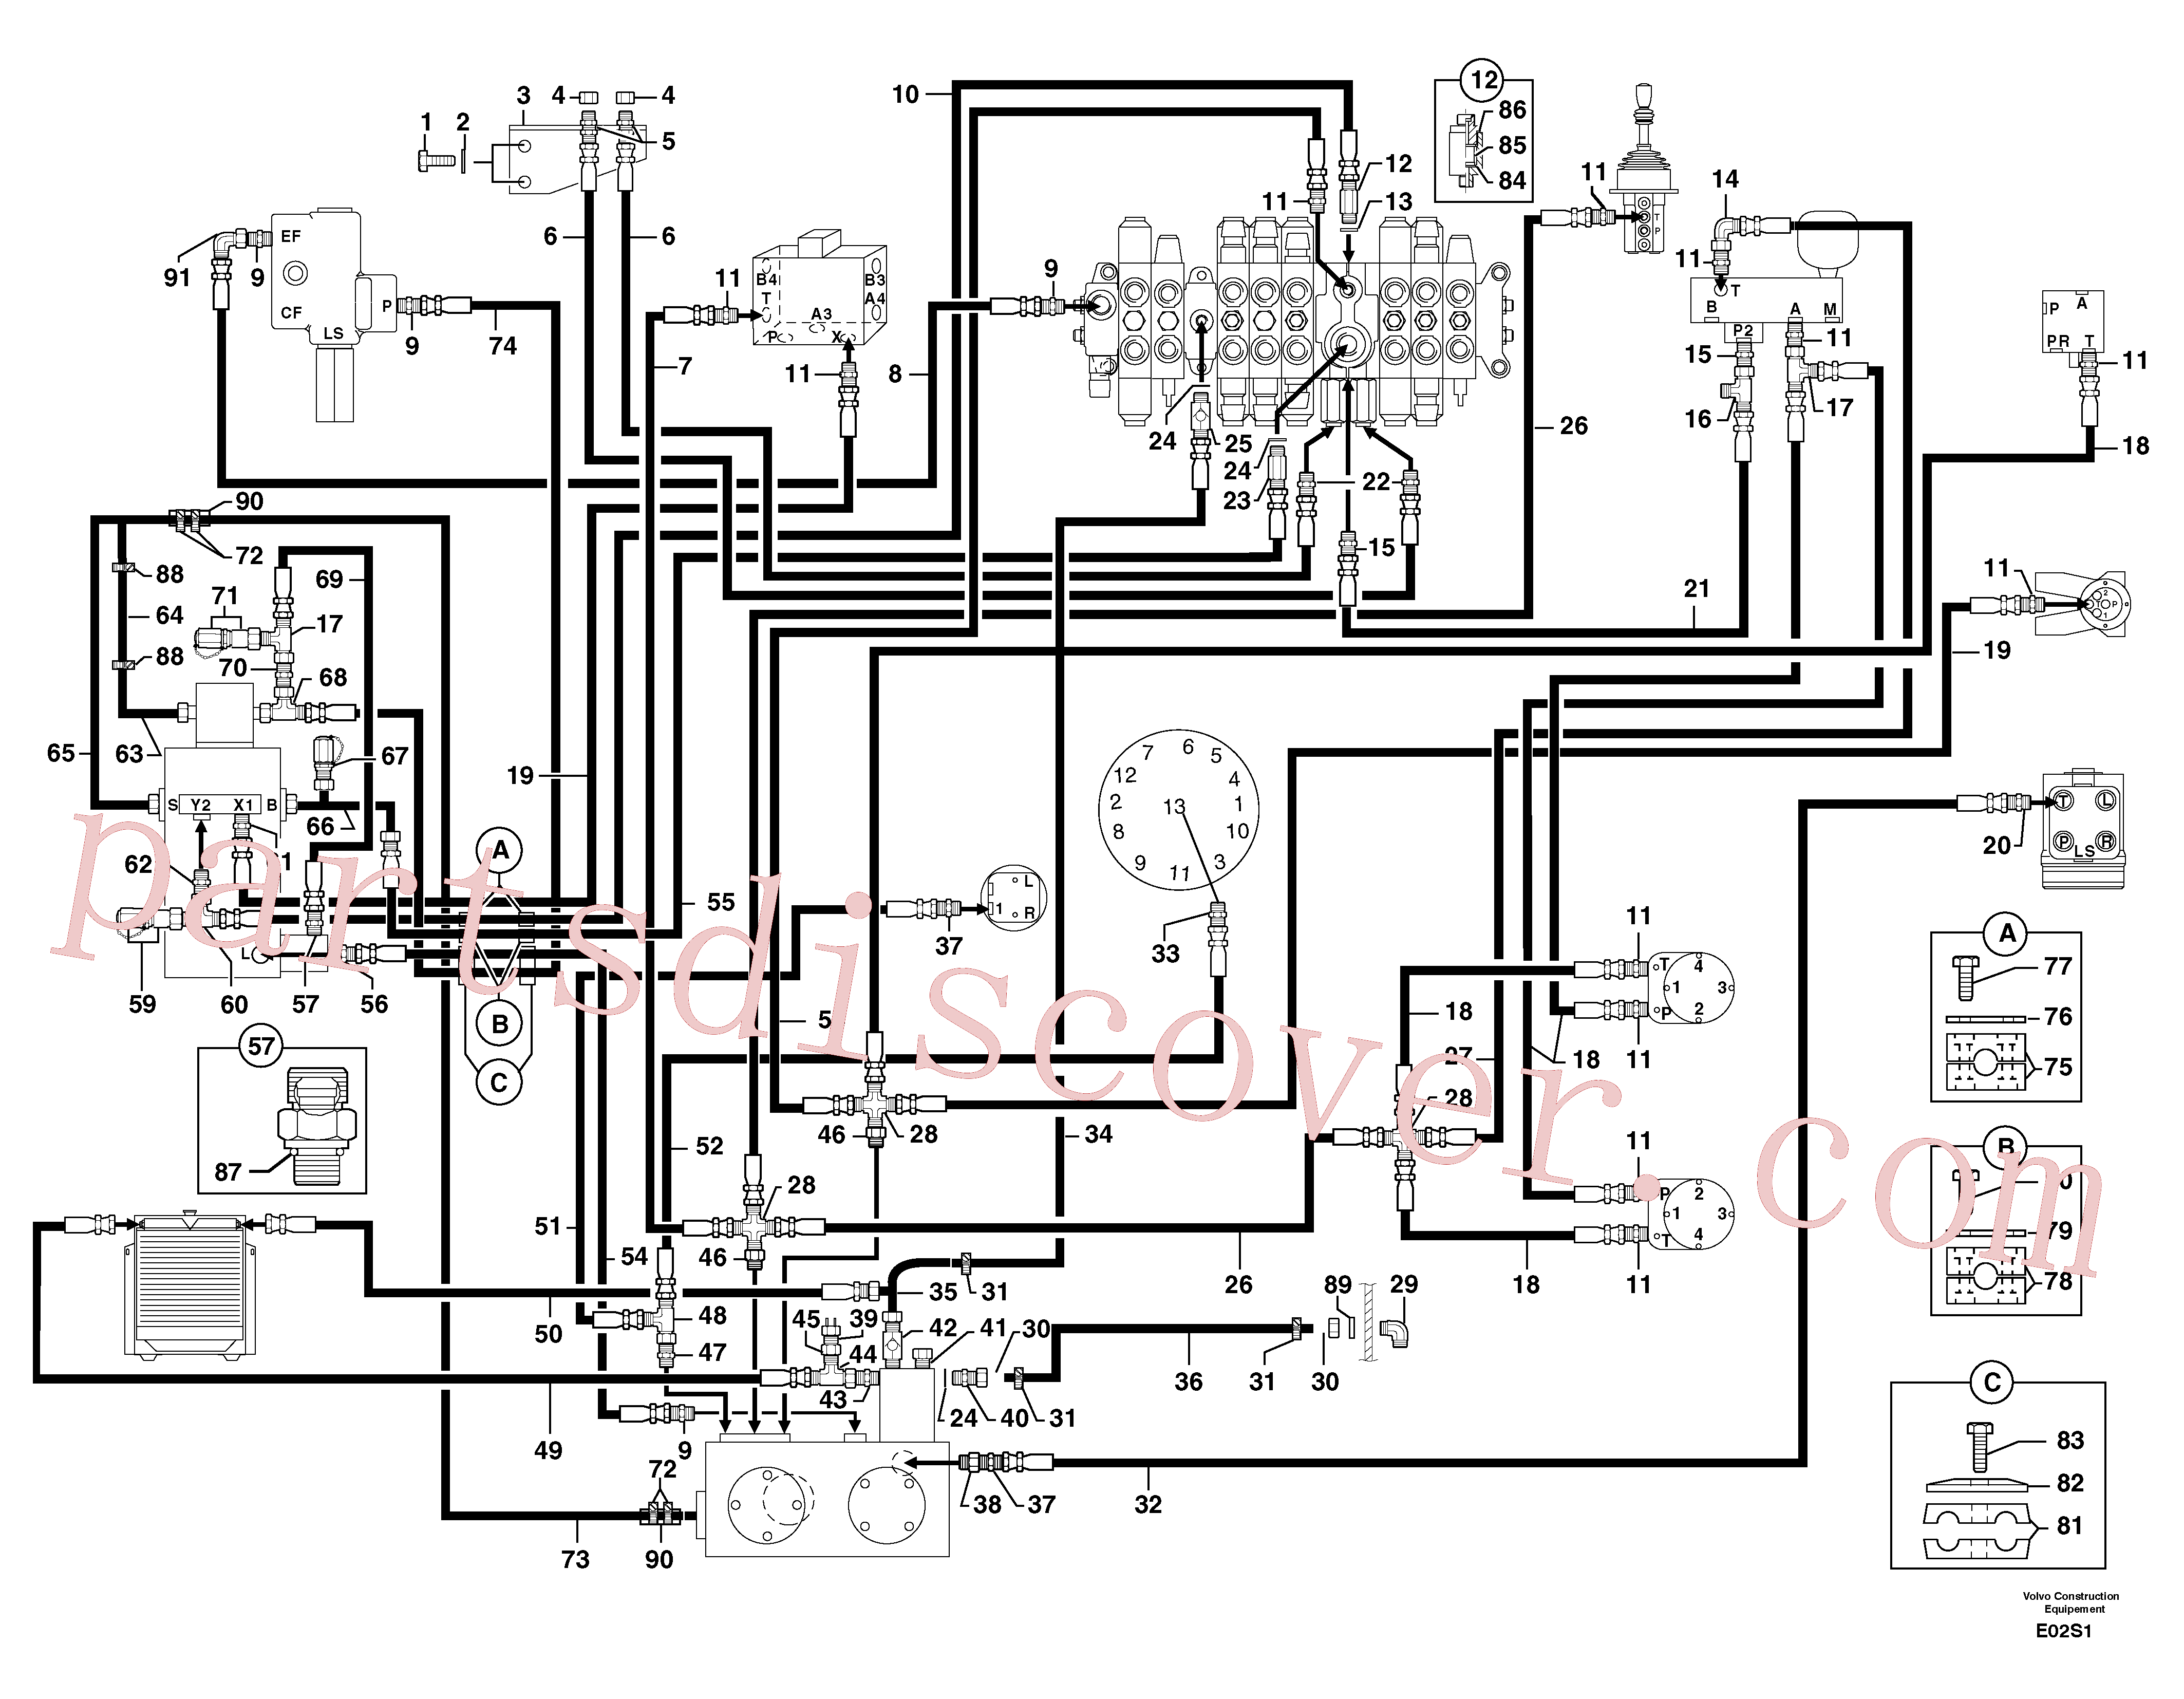 PJ4690070 for Volvo Attachments supply and return circuit(E02S1 assembly)